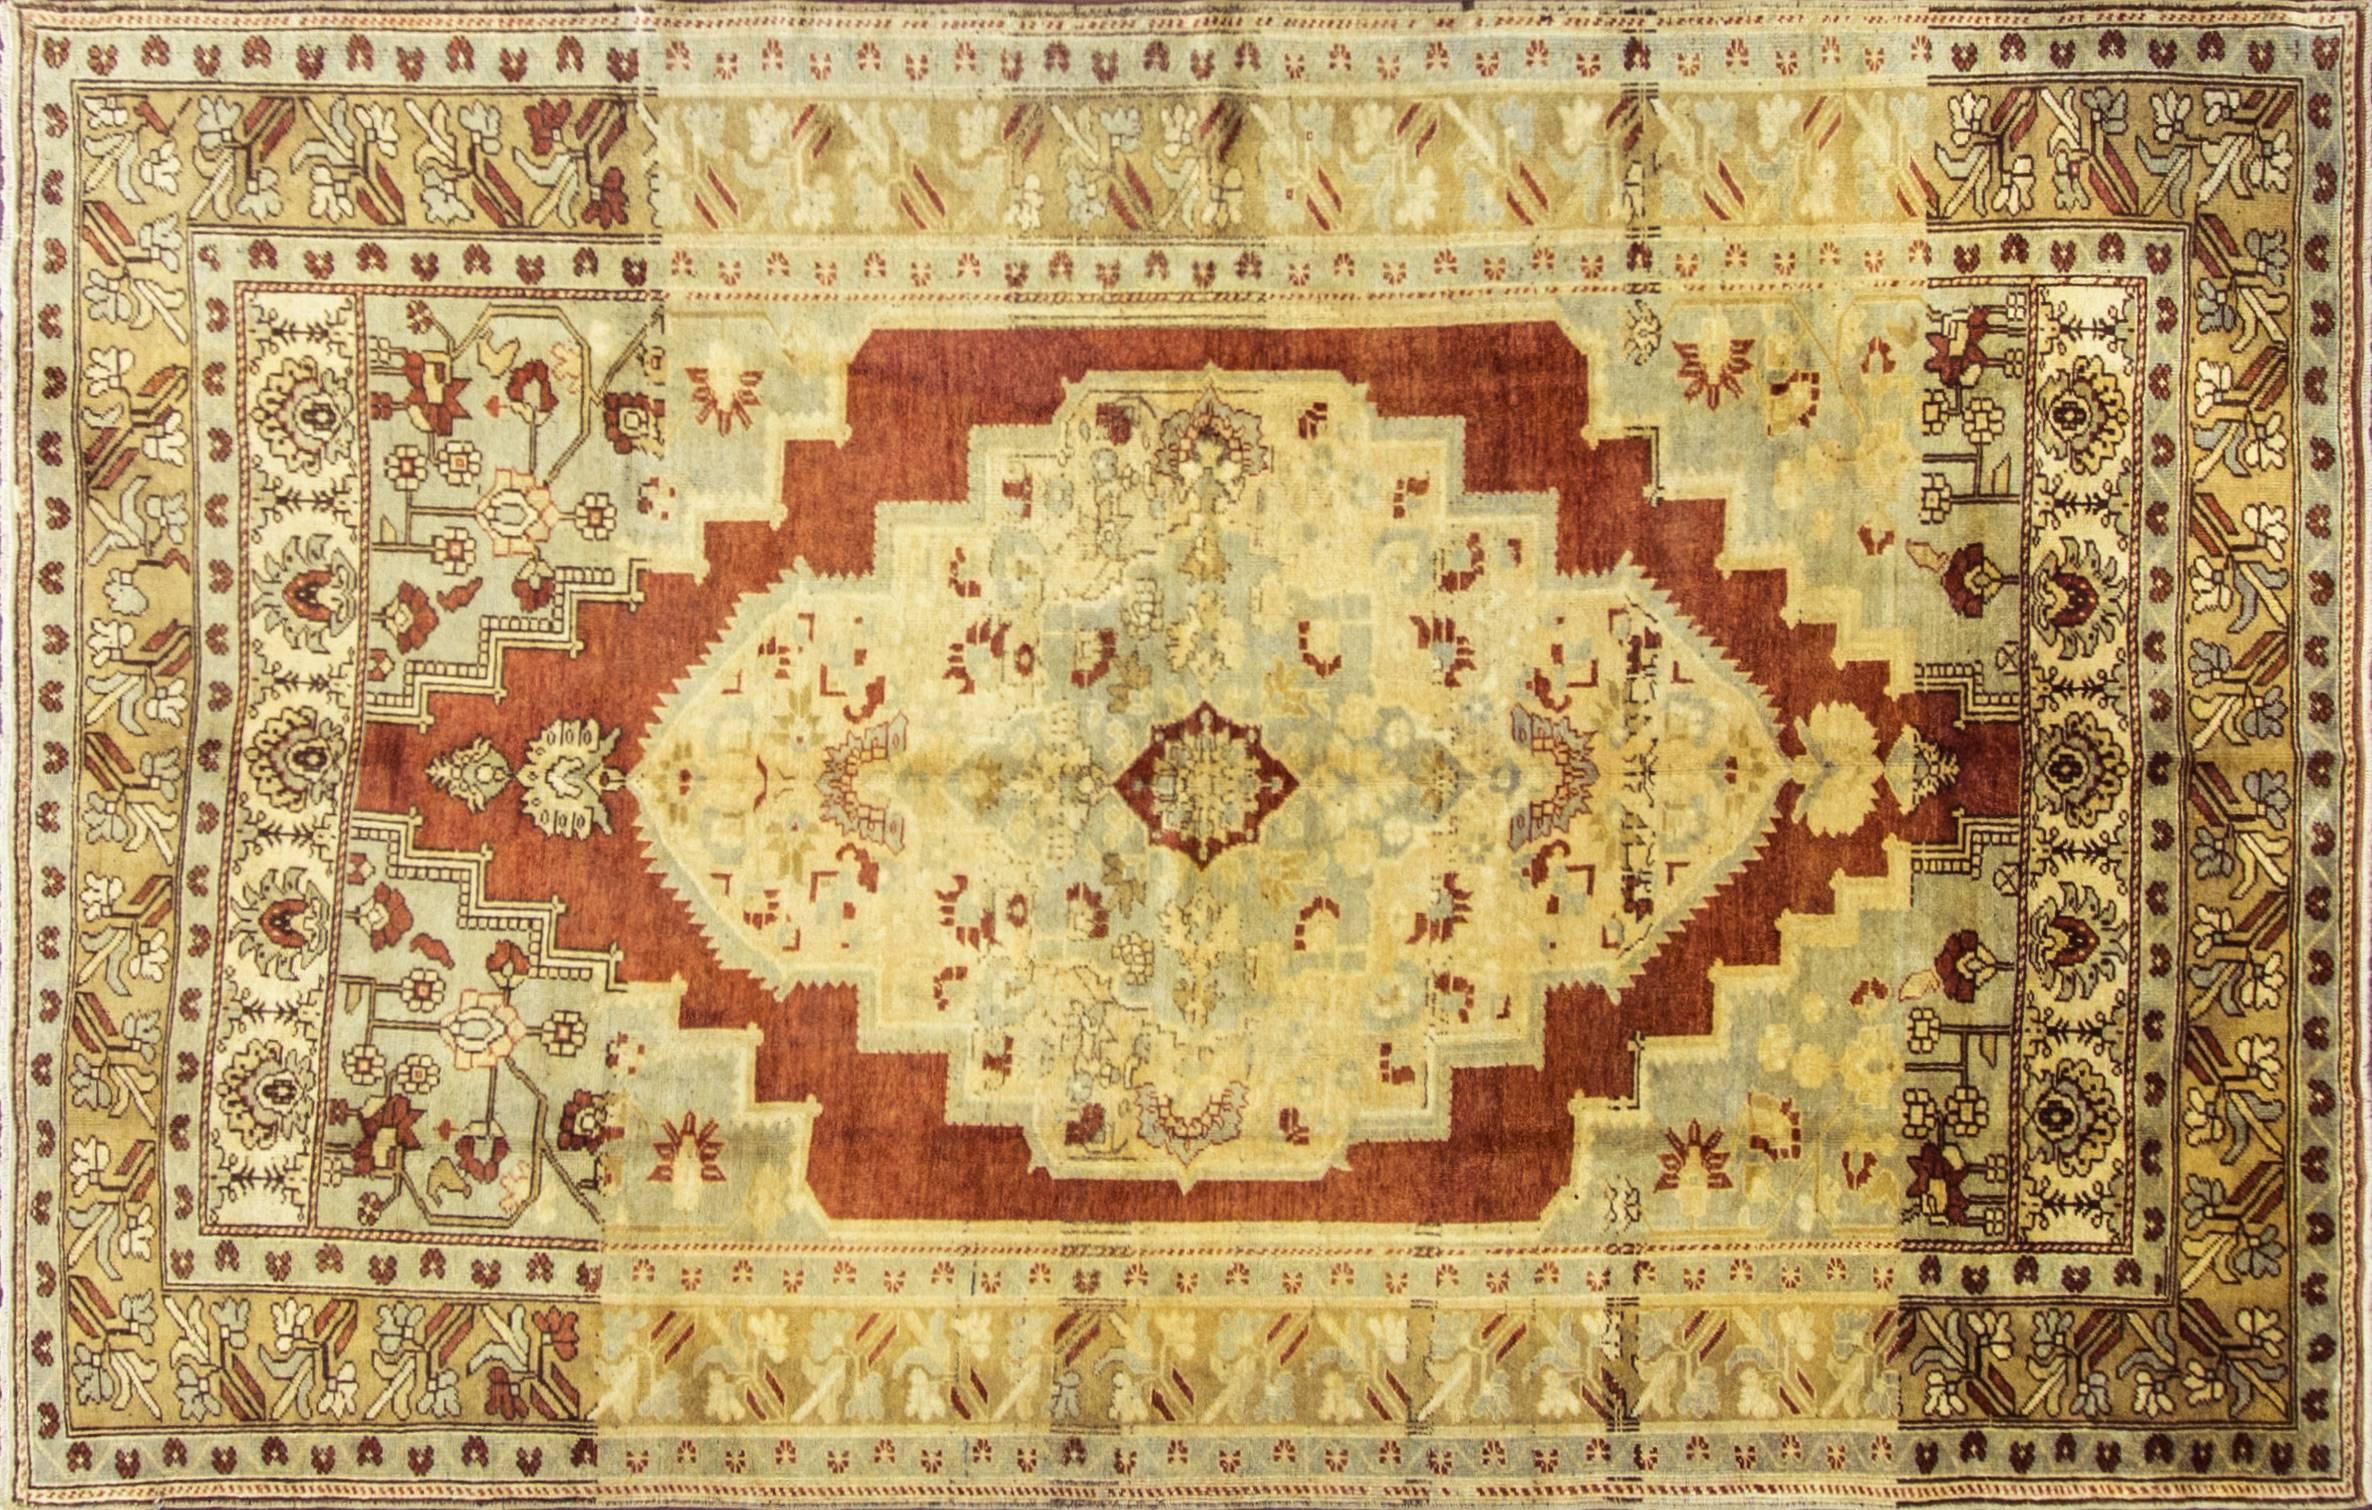 Fine weave and wool quality. Ushak rugs have been in production since the 15th century with superb wools and natural dyes. Unlike other Turkish rugs, Ushak rugs influenced after Persian rugs and the woven with Ghiordies knots and all double knotted,